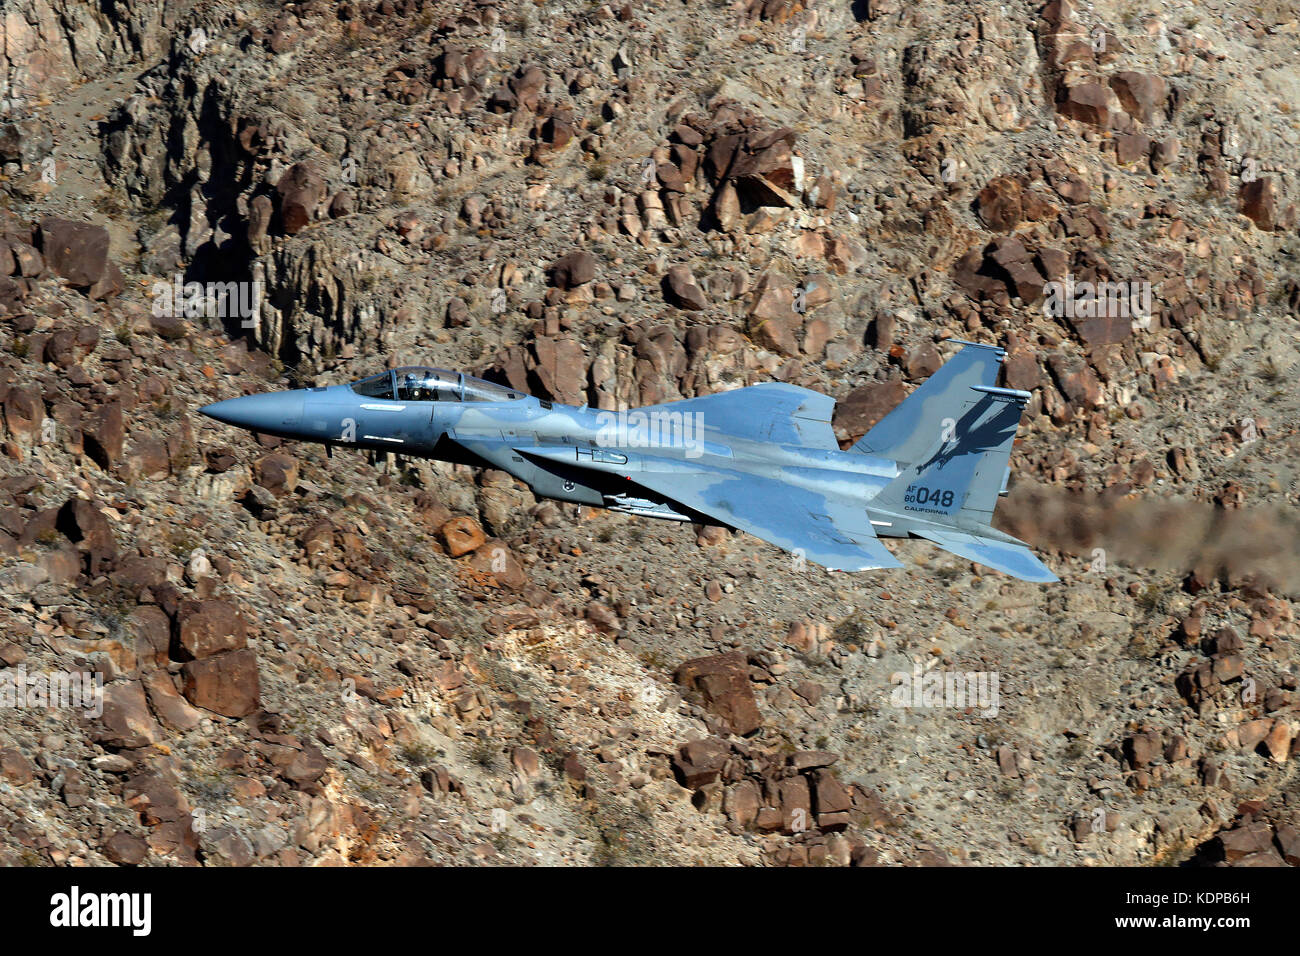 F-15 with the 144th fighter wing Air National Guard from Fresno, California, fly through Jedi transition in Death Valley National Park, California. Stock Photo